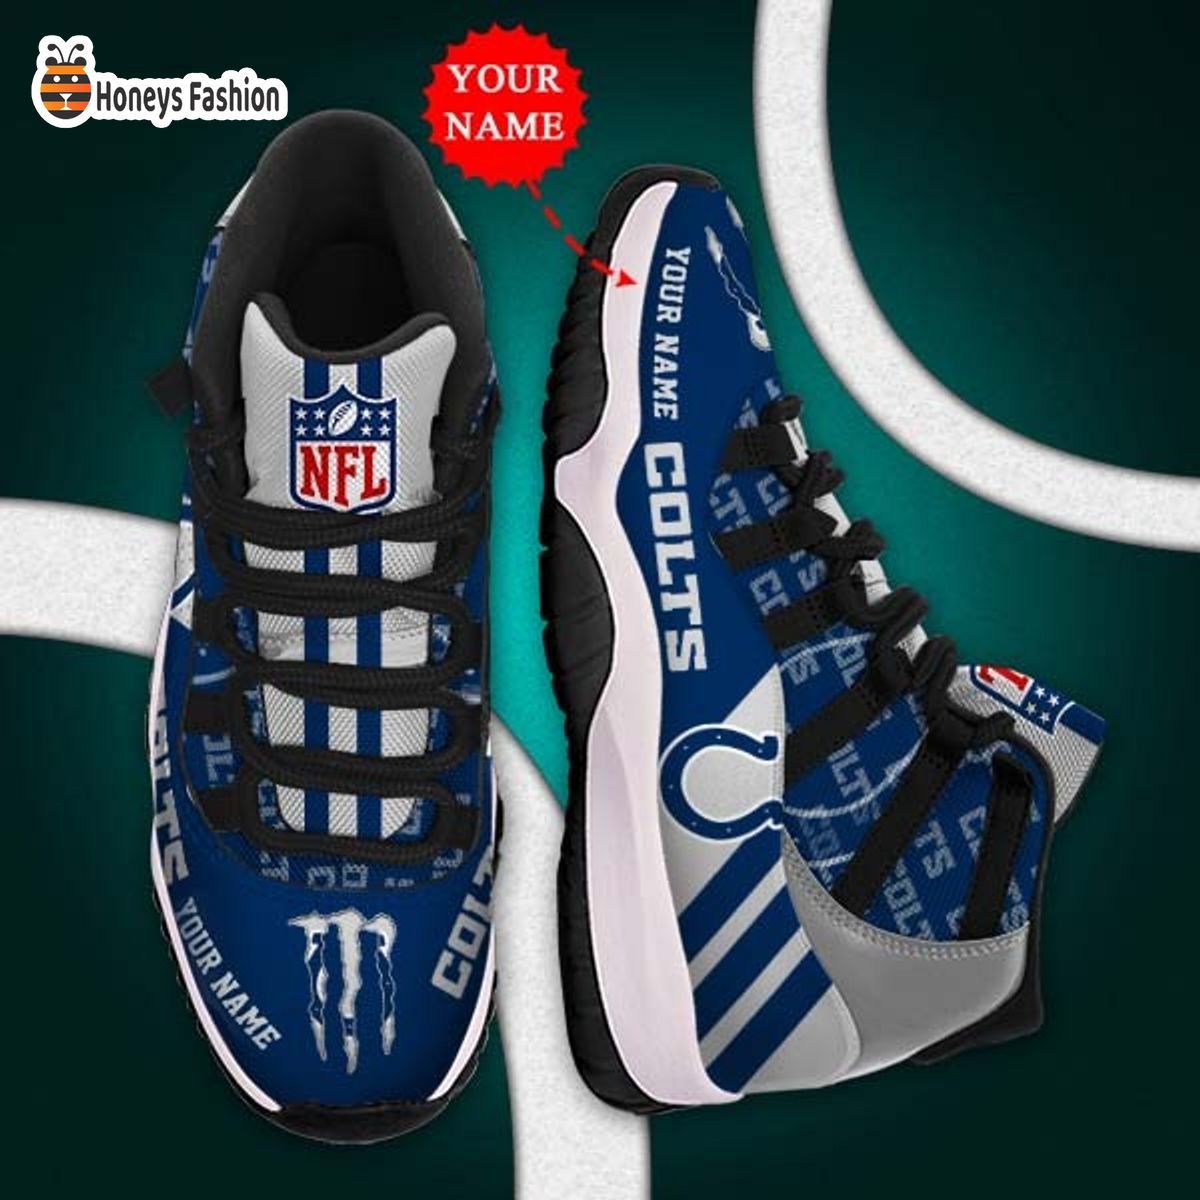 Indianapolis Colts NFL Adidas Personalized Air Jordan 11 Shoes